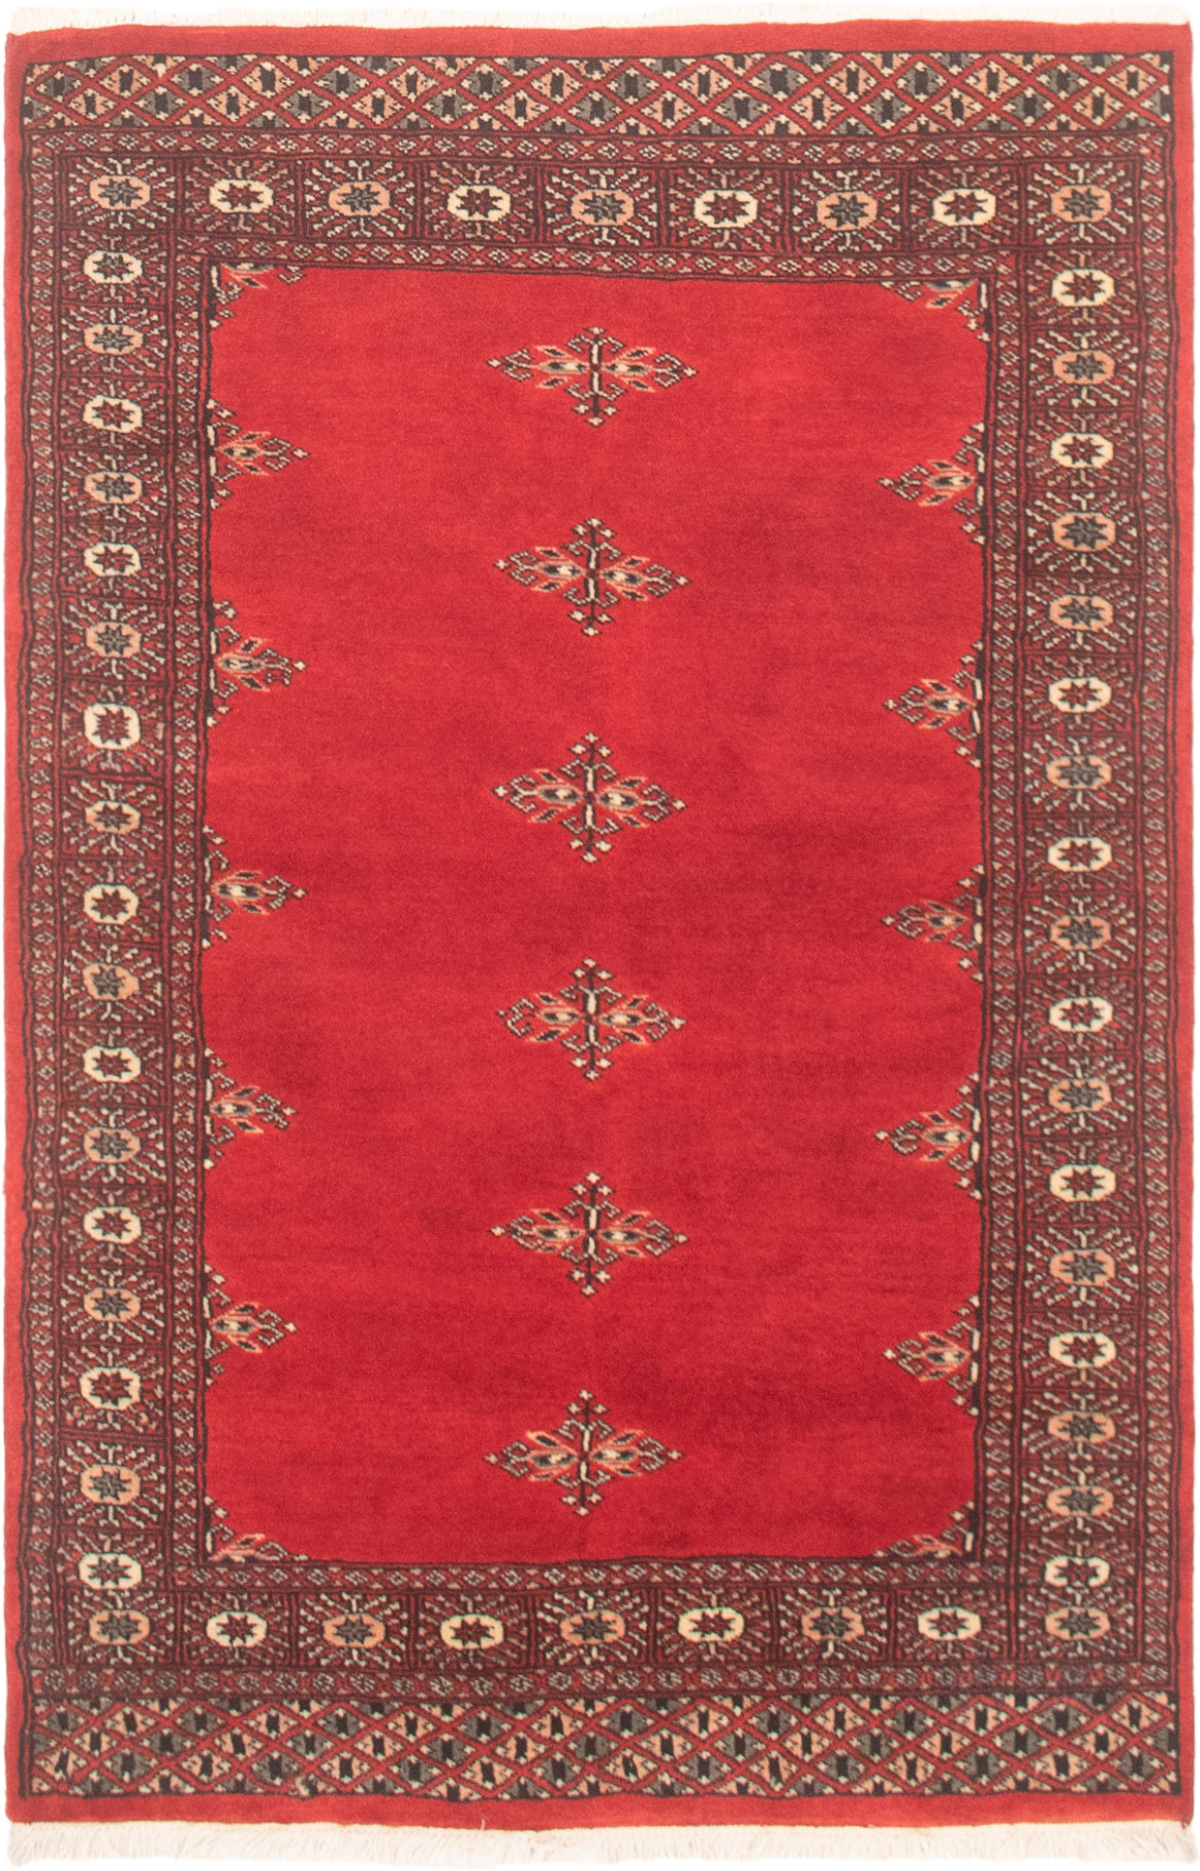 Hand-knotted Finest Peshawar Bokhara Red Wool Rug 3'1" x 4'8" Size: 3'1" x 4'8"  